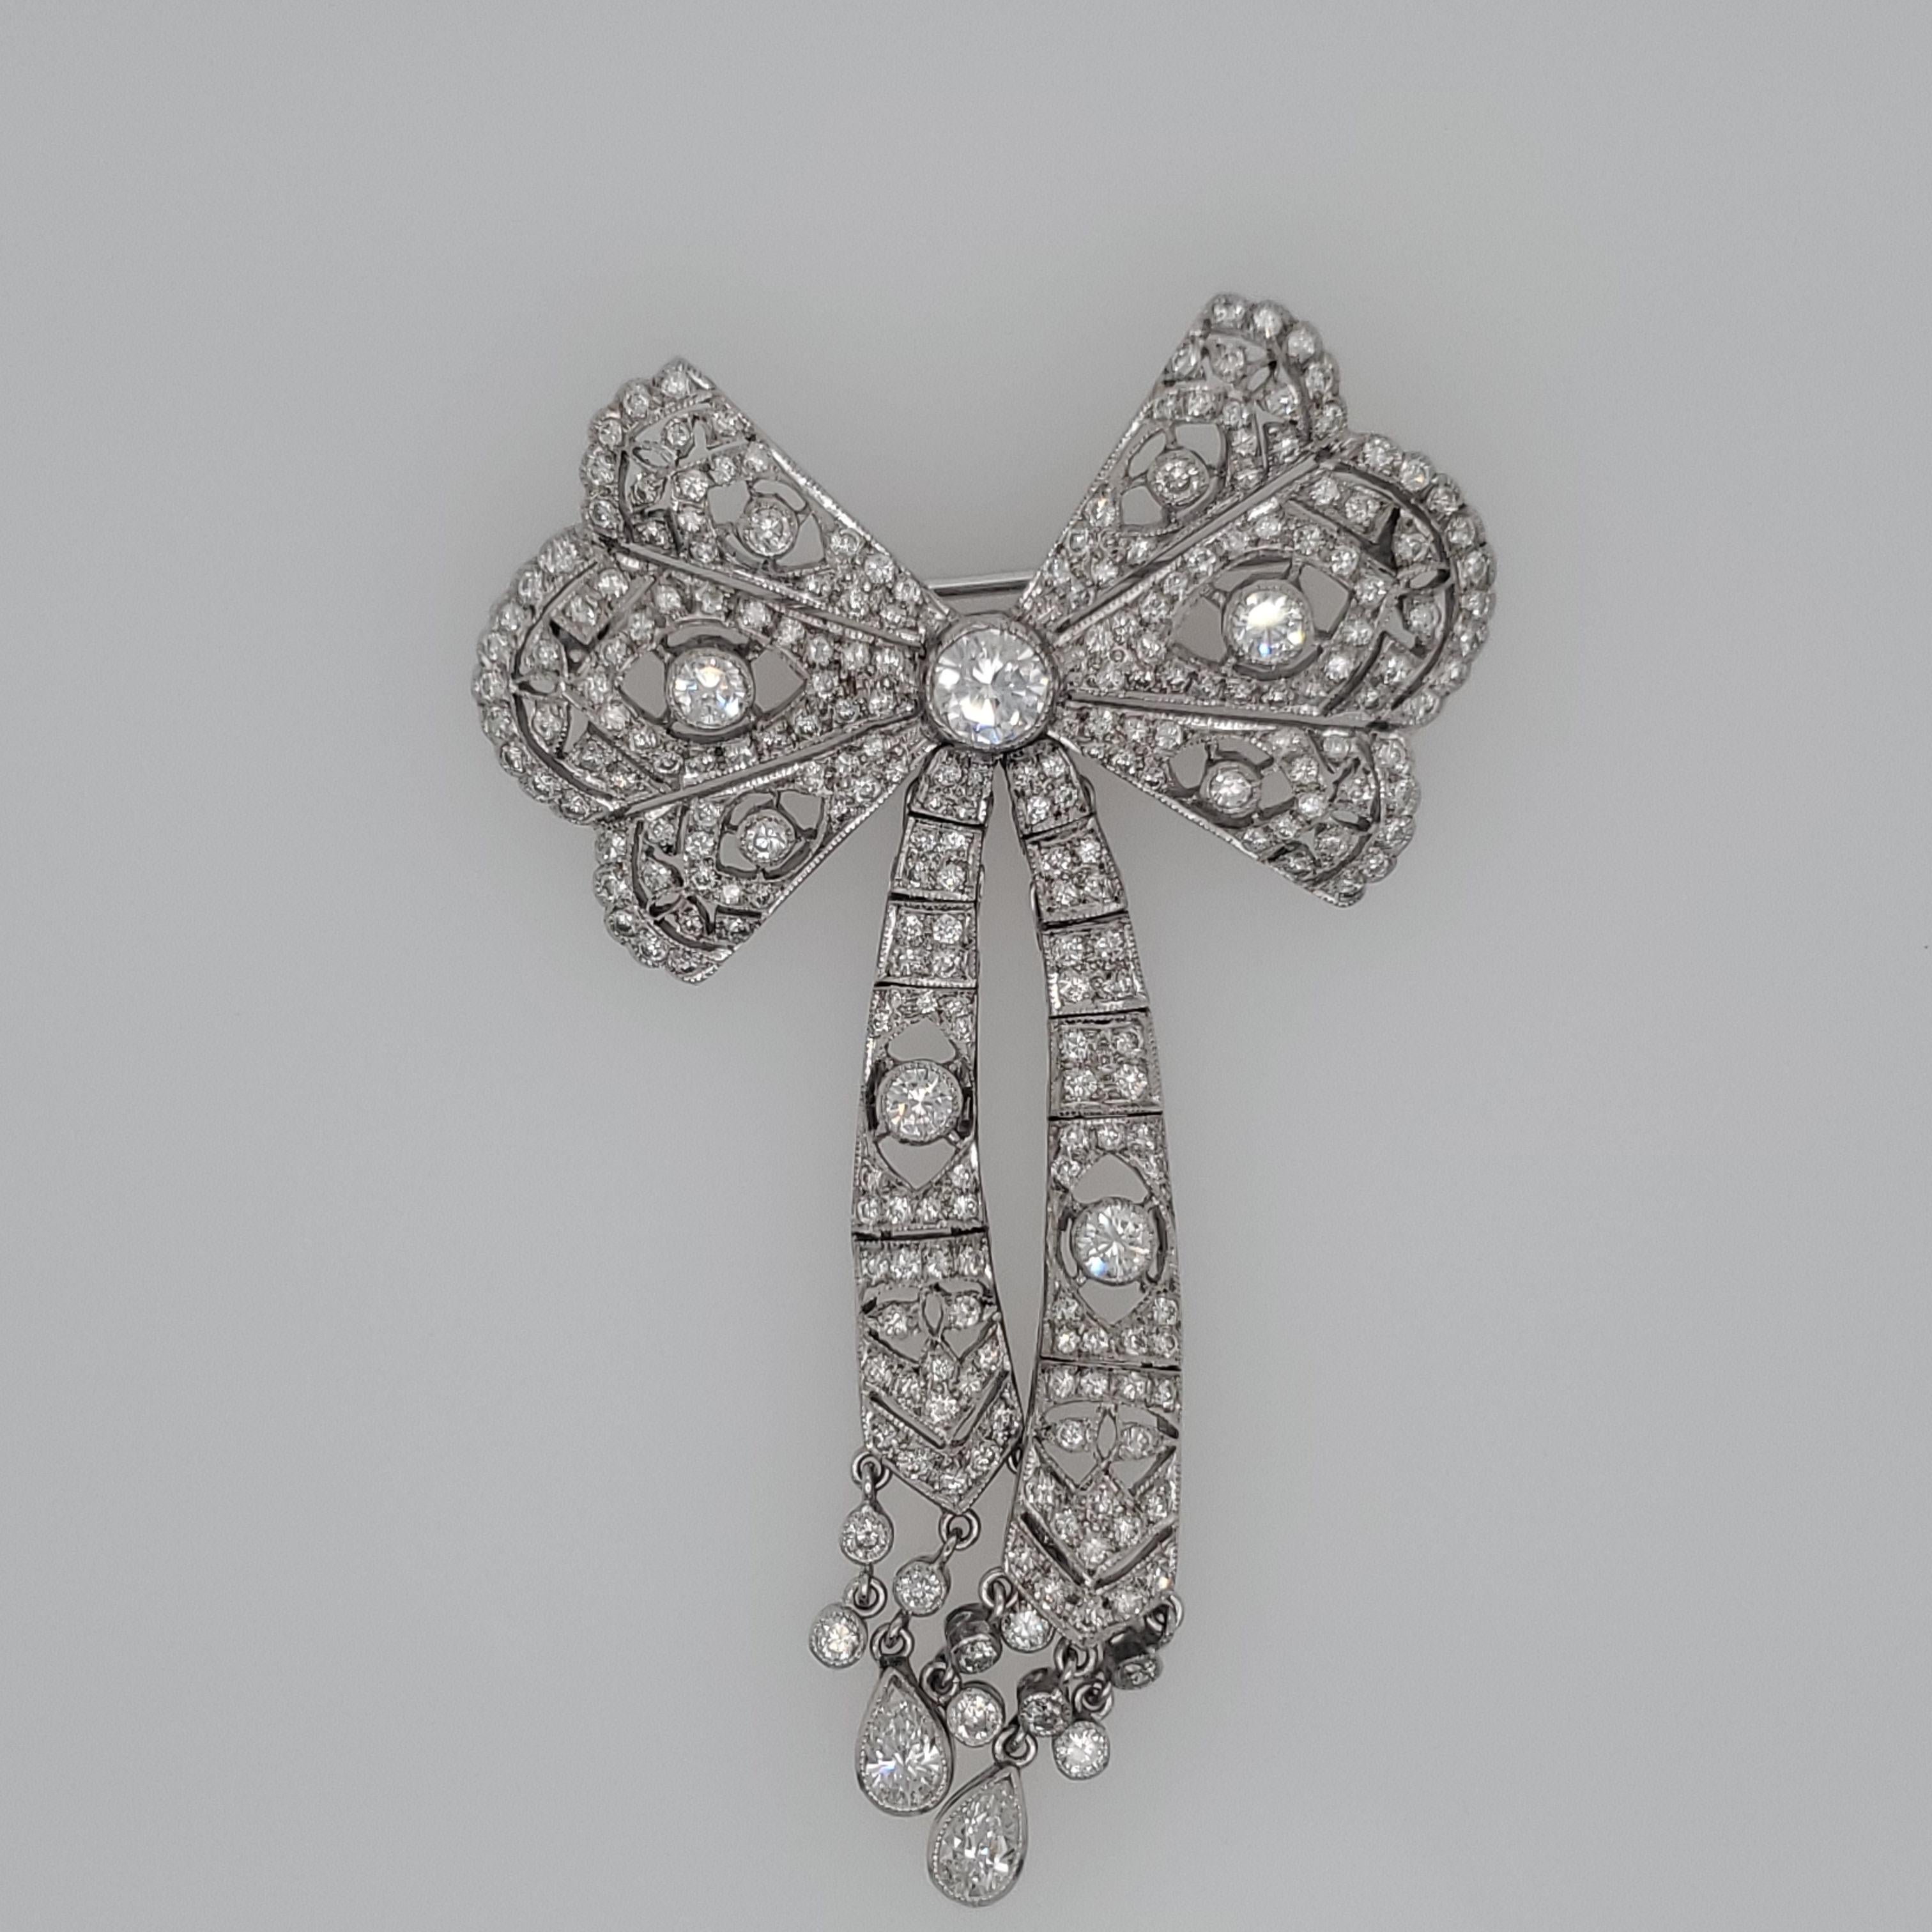 18 Karat White gold Bow Brooch with approximately 2.20 carats of white diamonds.The Pin has movable strands as well as hanging rows of diamonds on the bottom. 